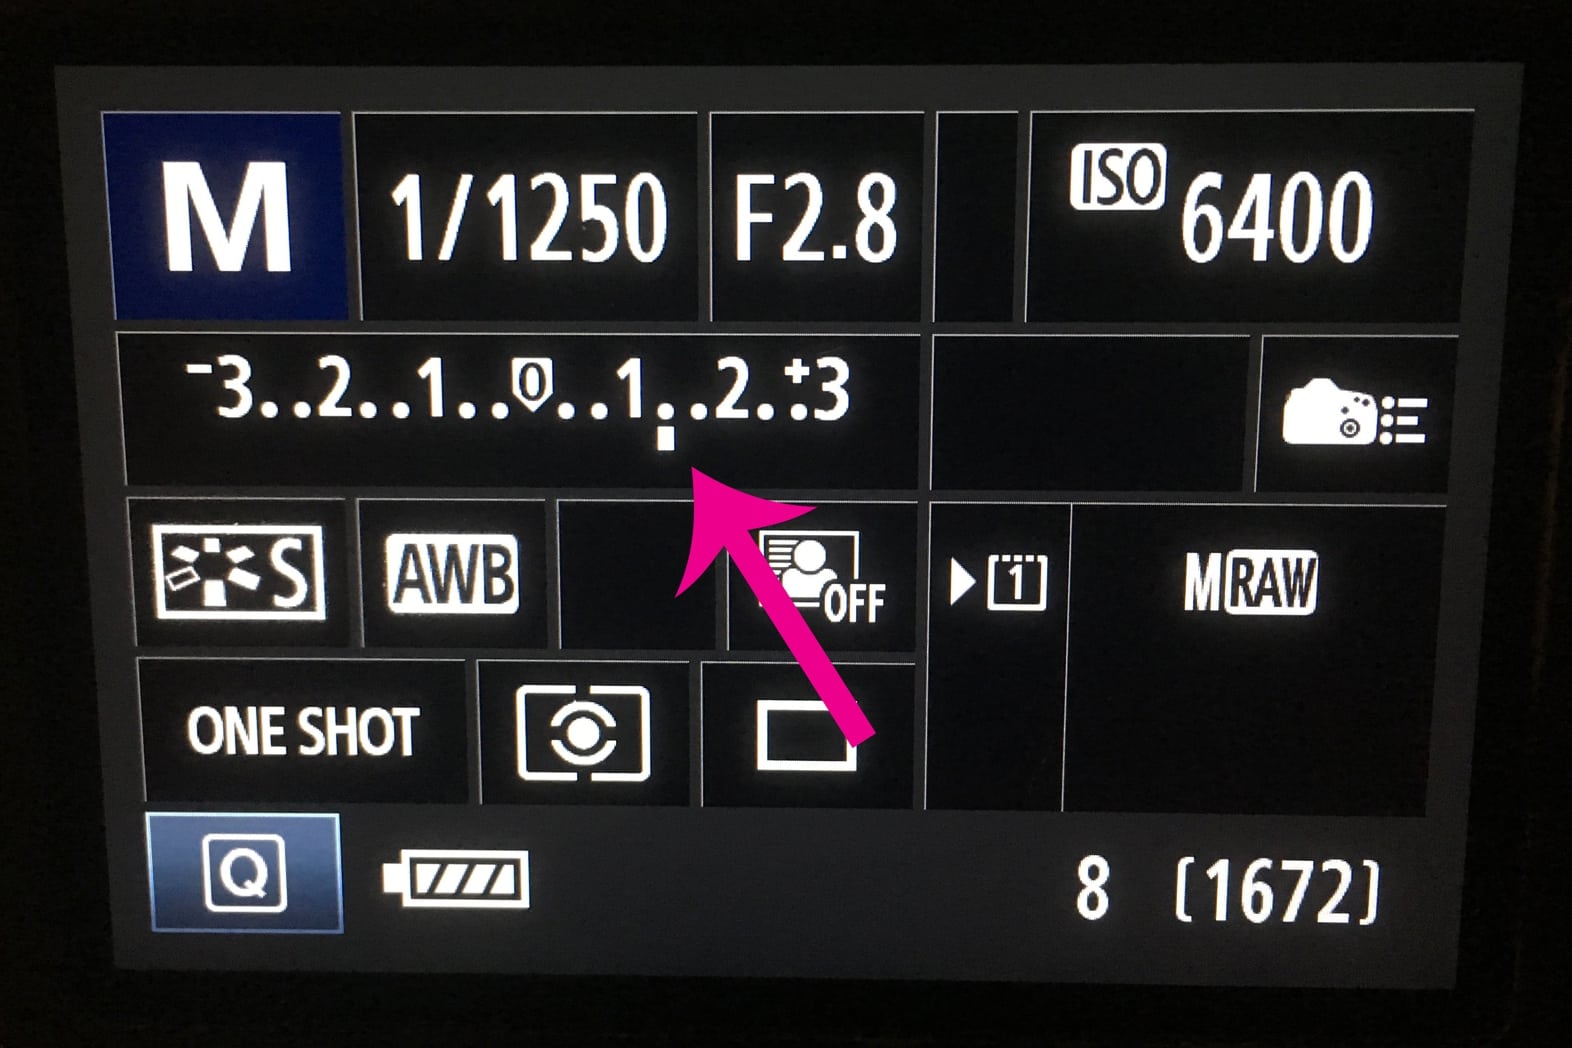 image of camera menu showing high iso and exposure settings